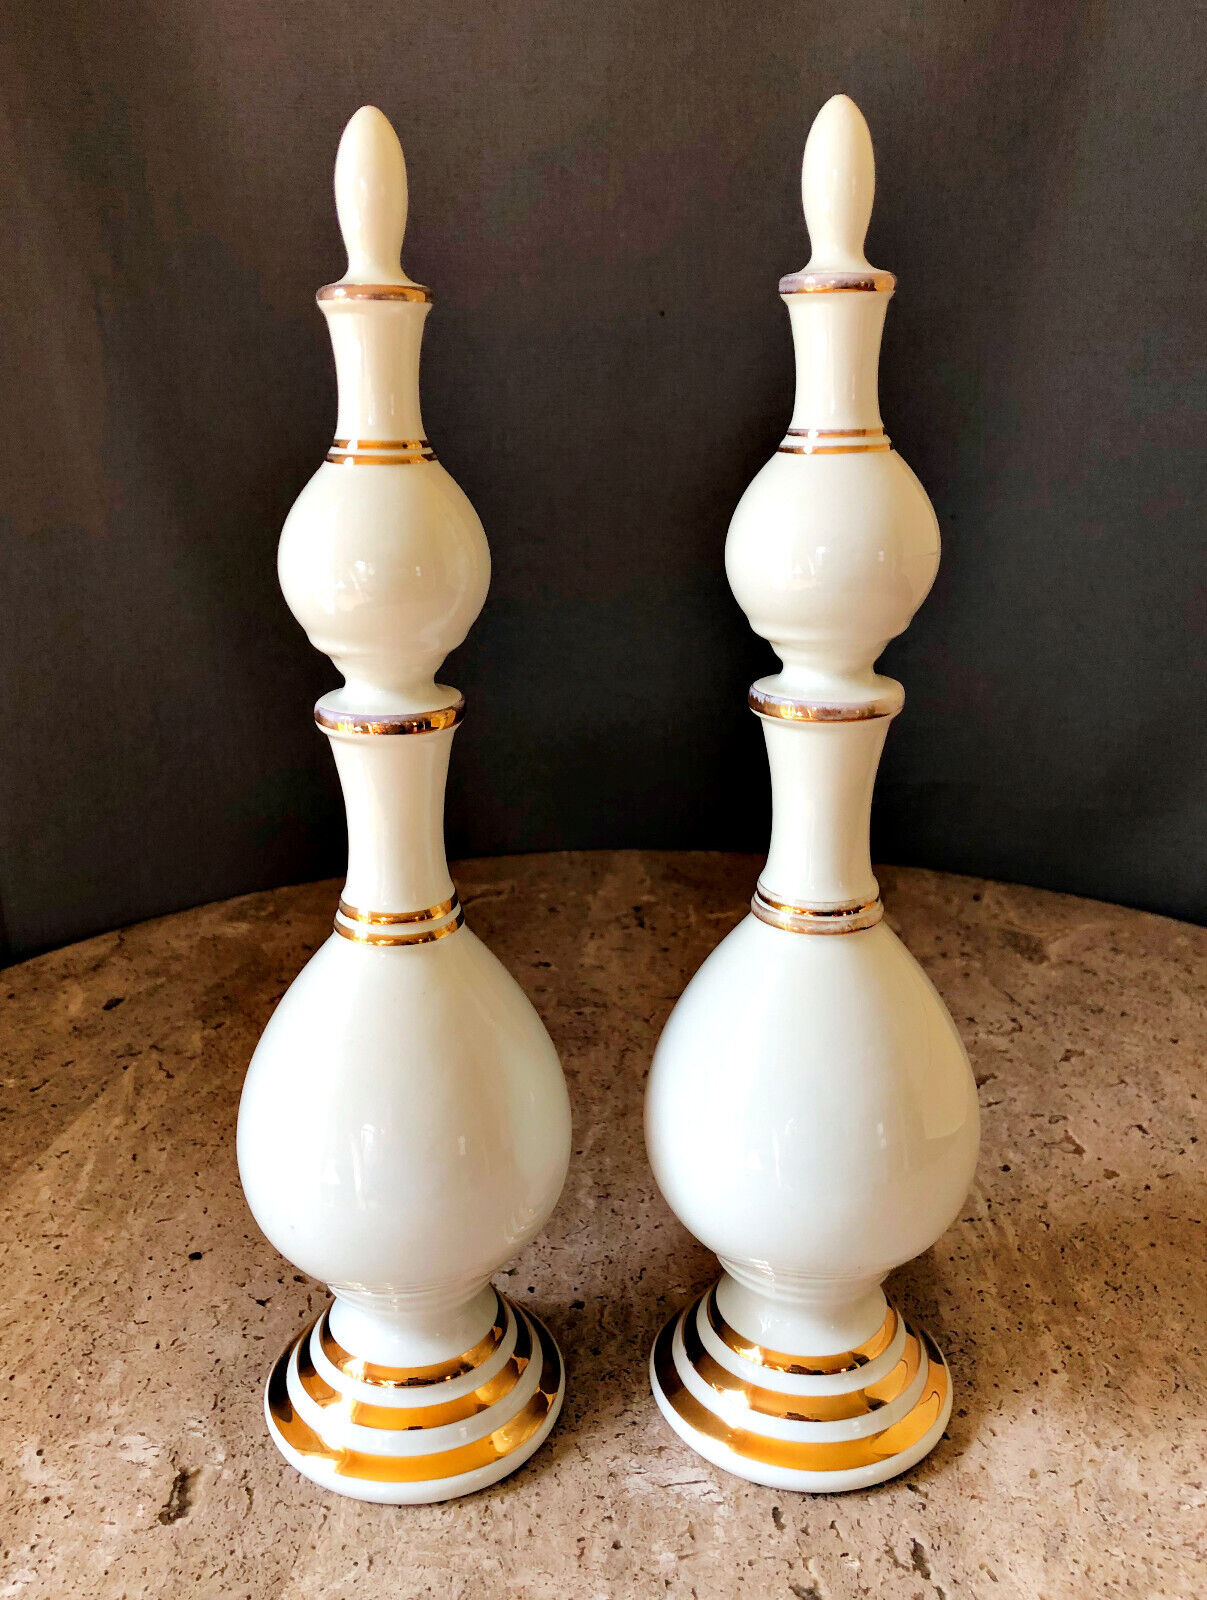 Pair of Owens Illinois RX Porcelain Pharmacy Display Apothecary Show Globes